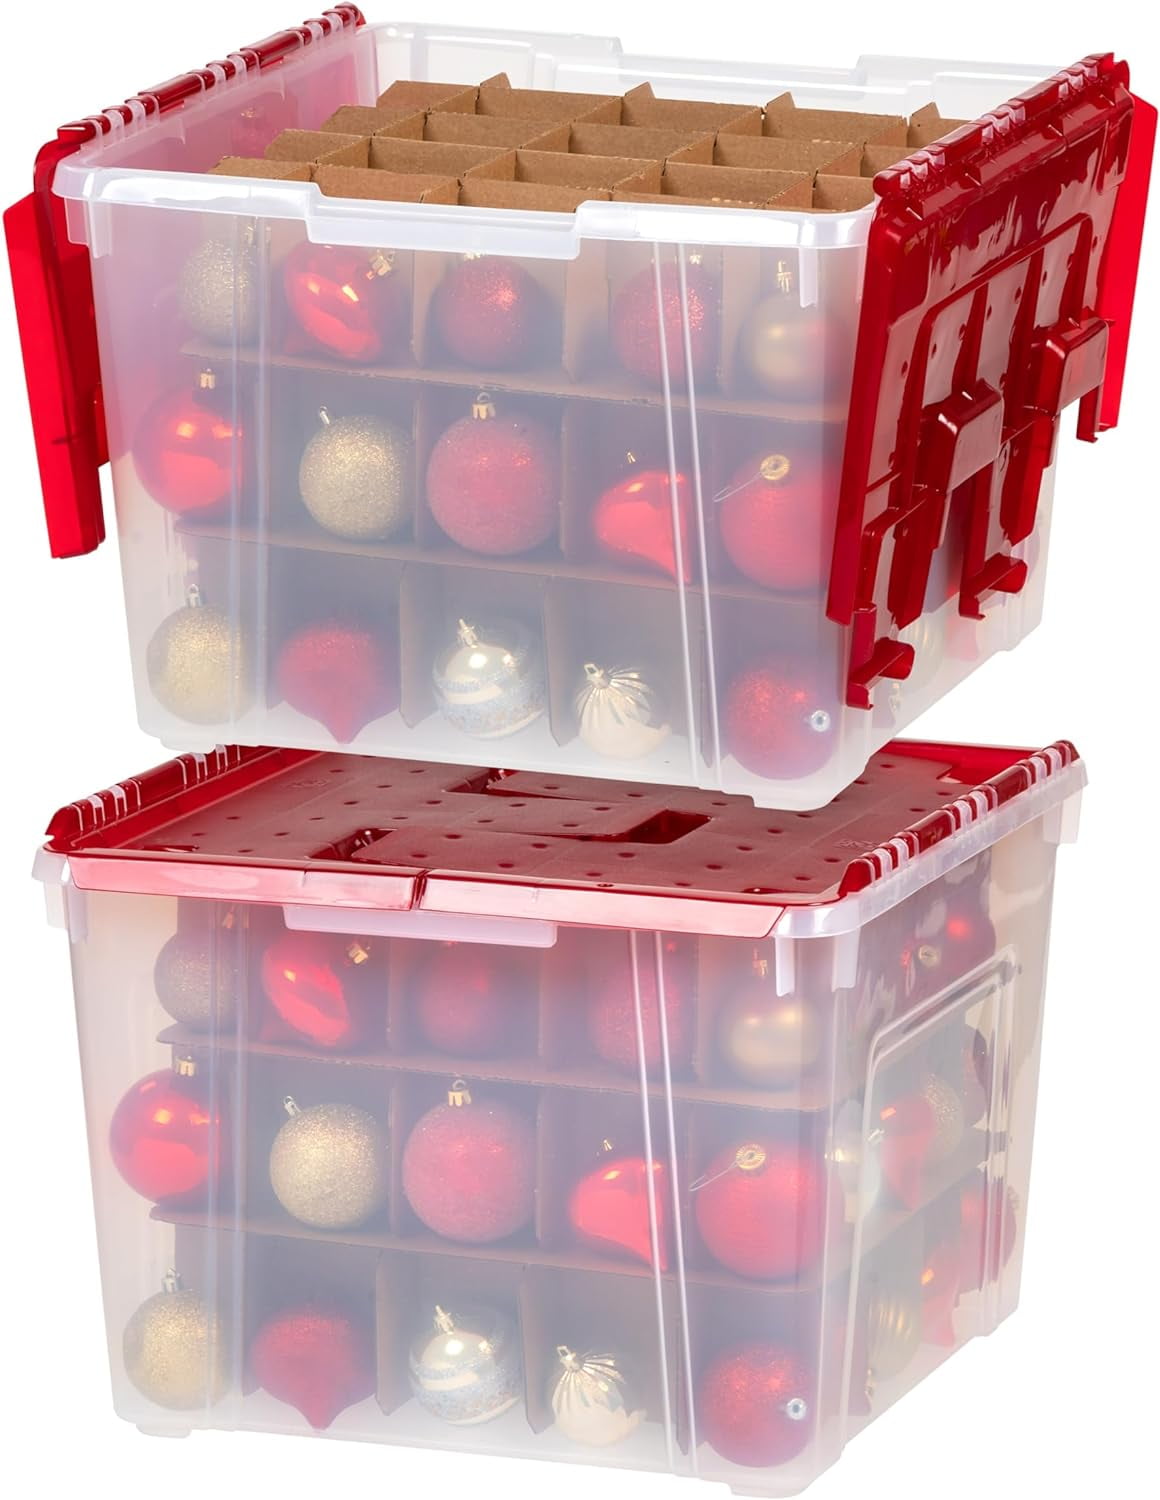  IRIS USA 19 Quart Stackable Plastic Holiday Storage Bins with  Lids and Latching Buckles, 4 Pack - Clear/Red, Durable Containers for Long  Term Storage Festive Seasonal Decorations Garlands Stockings : Everything  Else